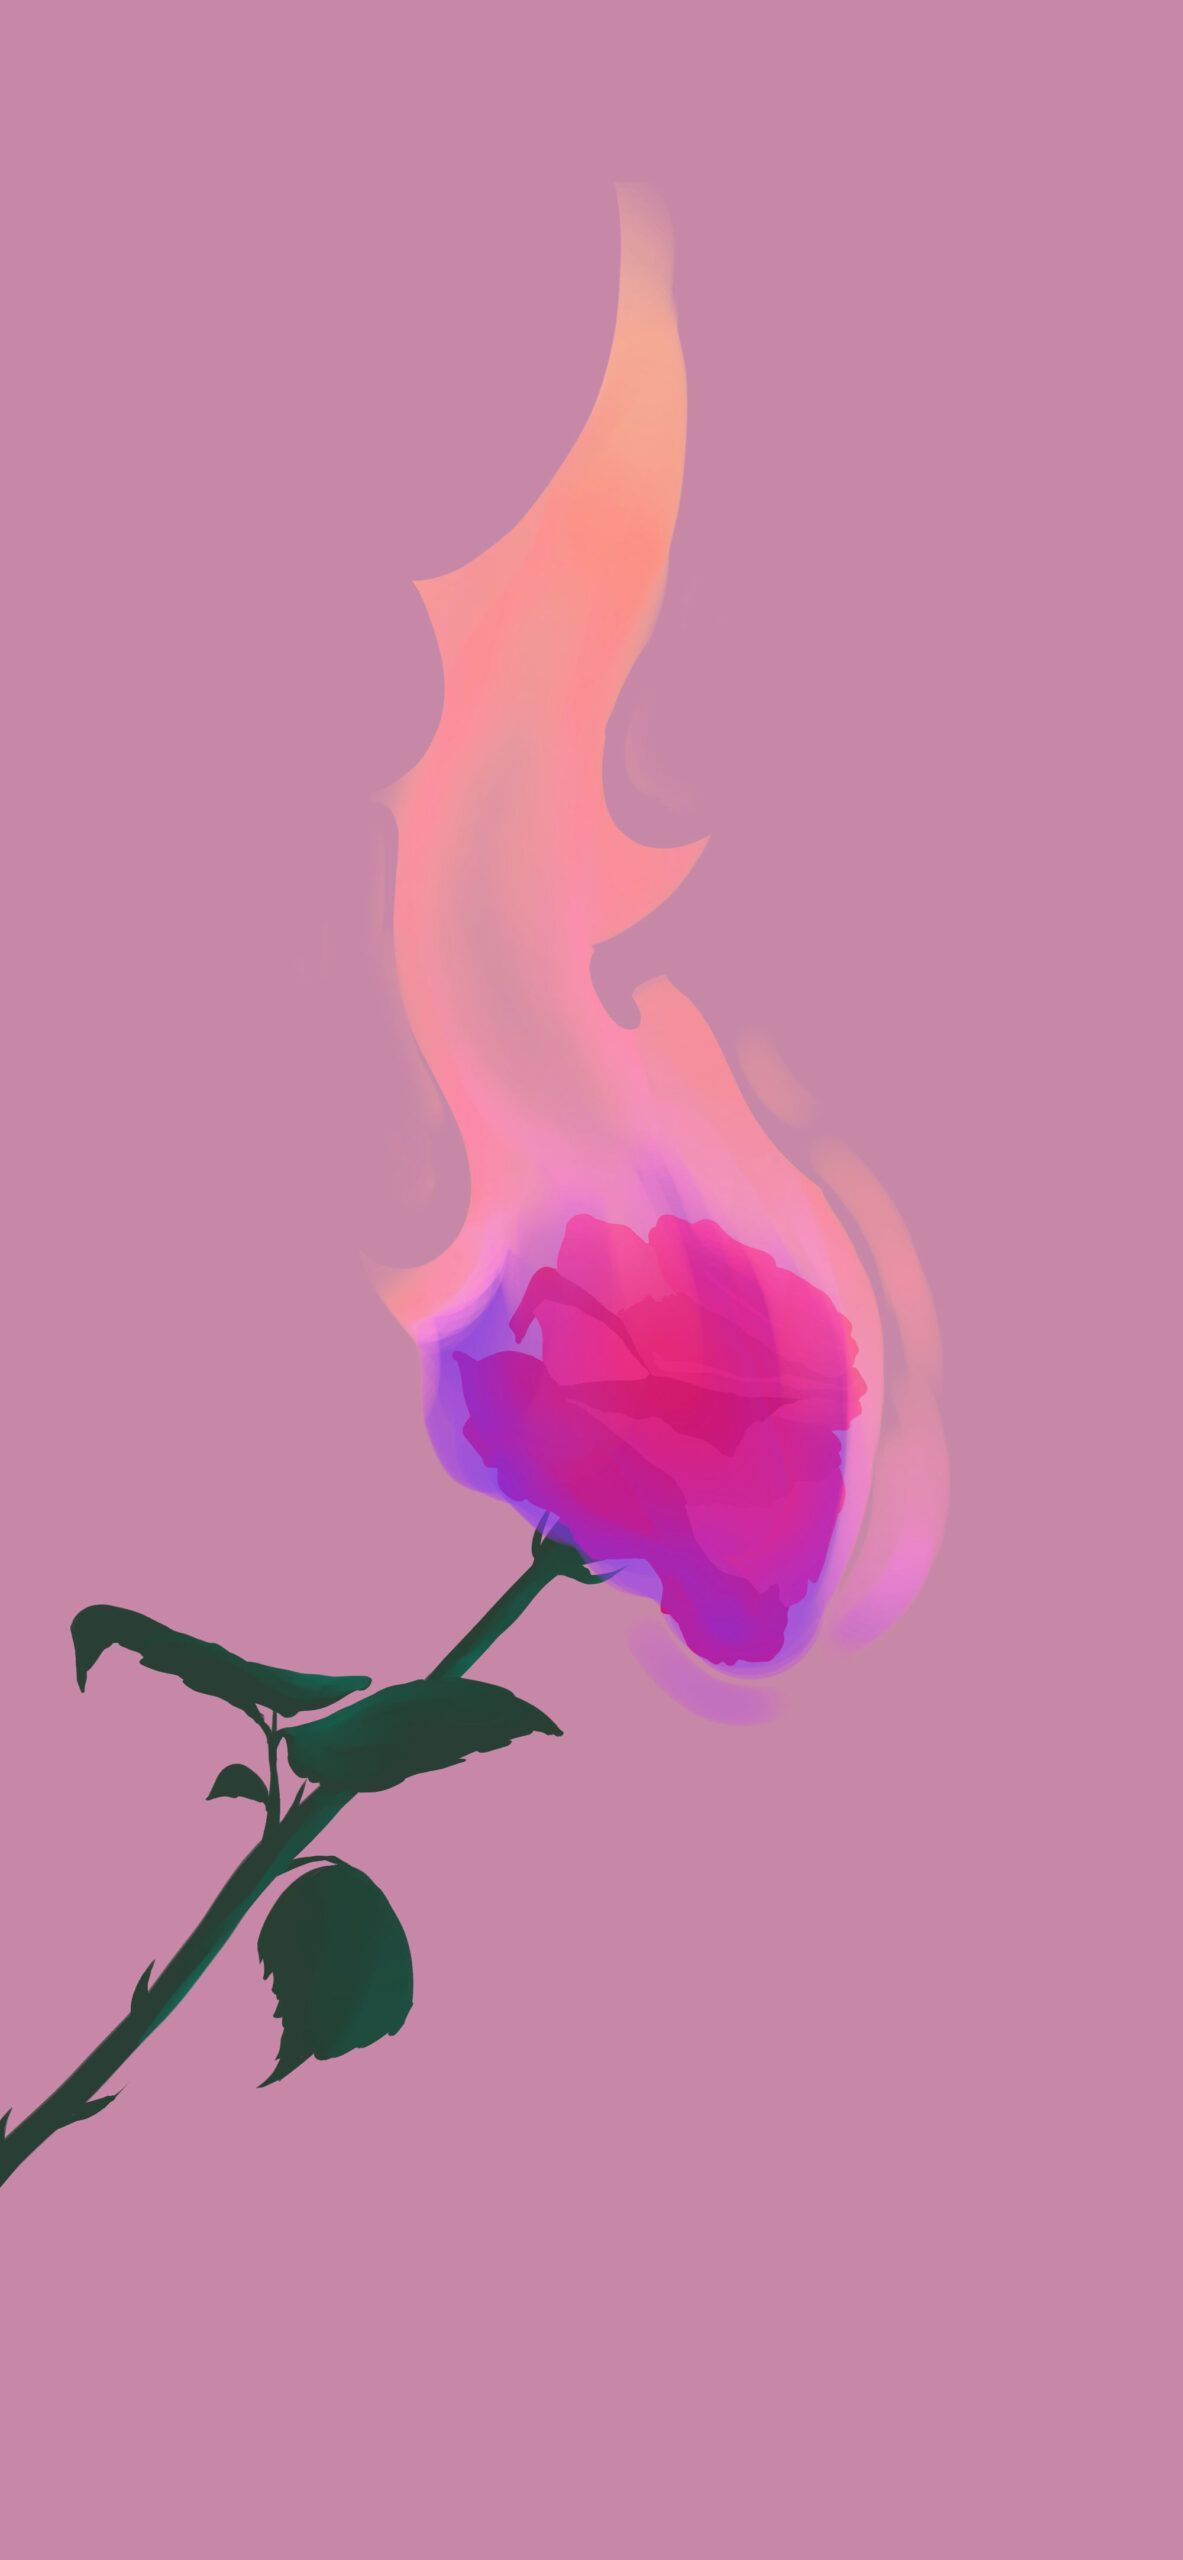 A pink and purple flower with fire coming out of it - Fire, flames